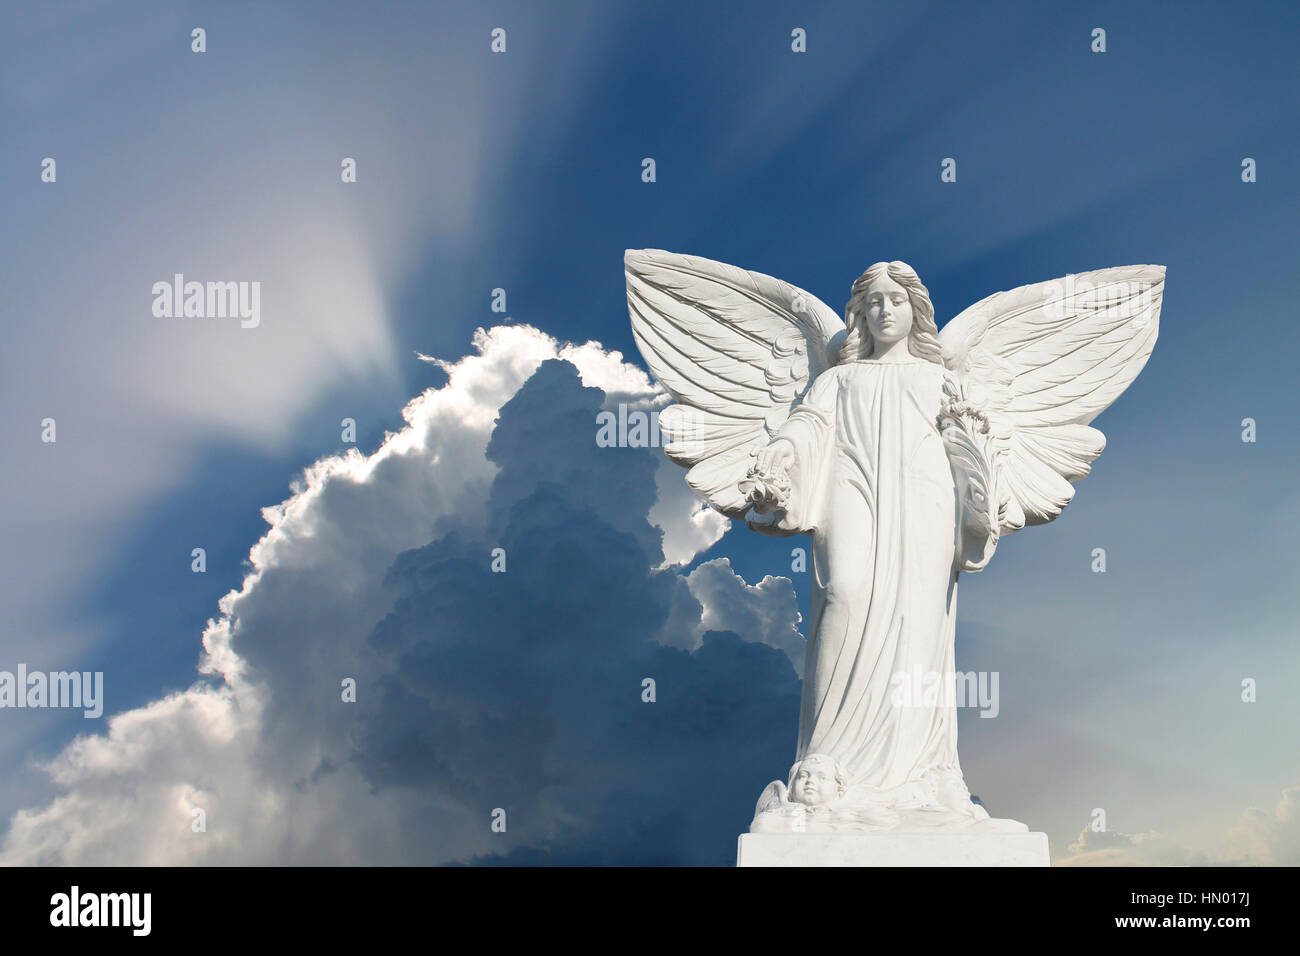 White Angel with blue sky and clouds, symbolic image for celestial, purity, hope Stock Photo